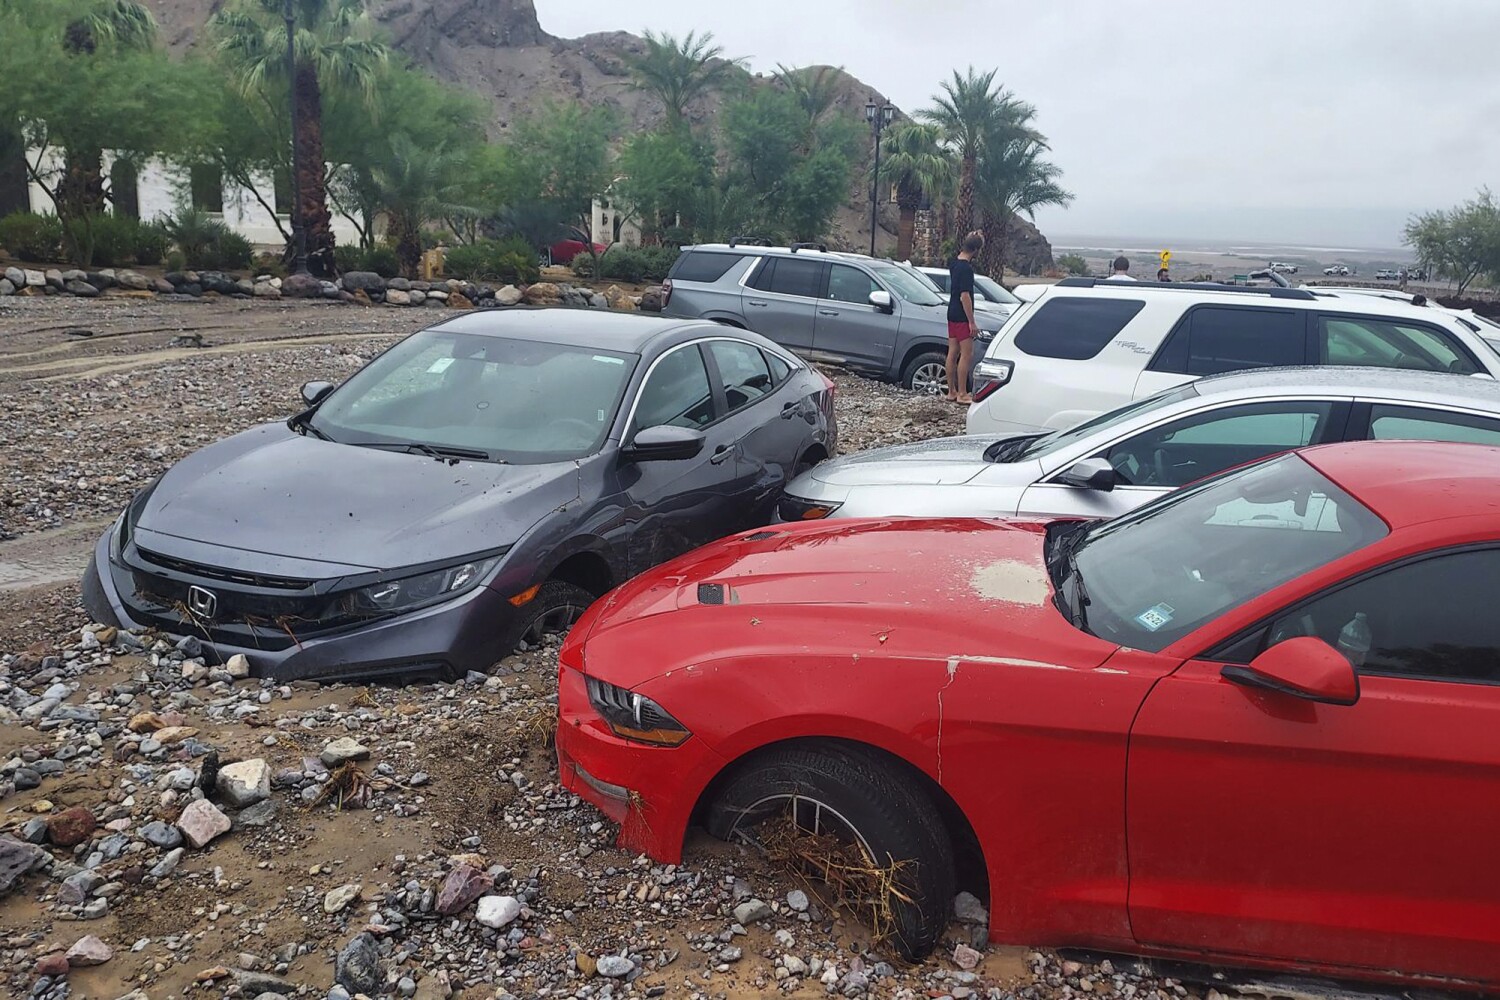 Destructive rain in Death Valley and flooded Vegas casinos mark a summer of extreme weather